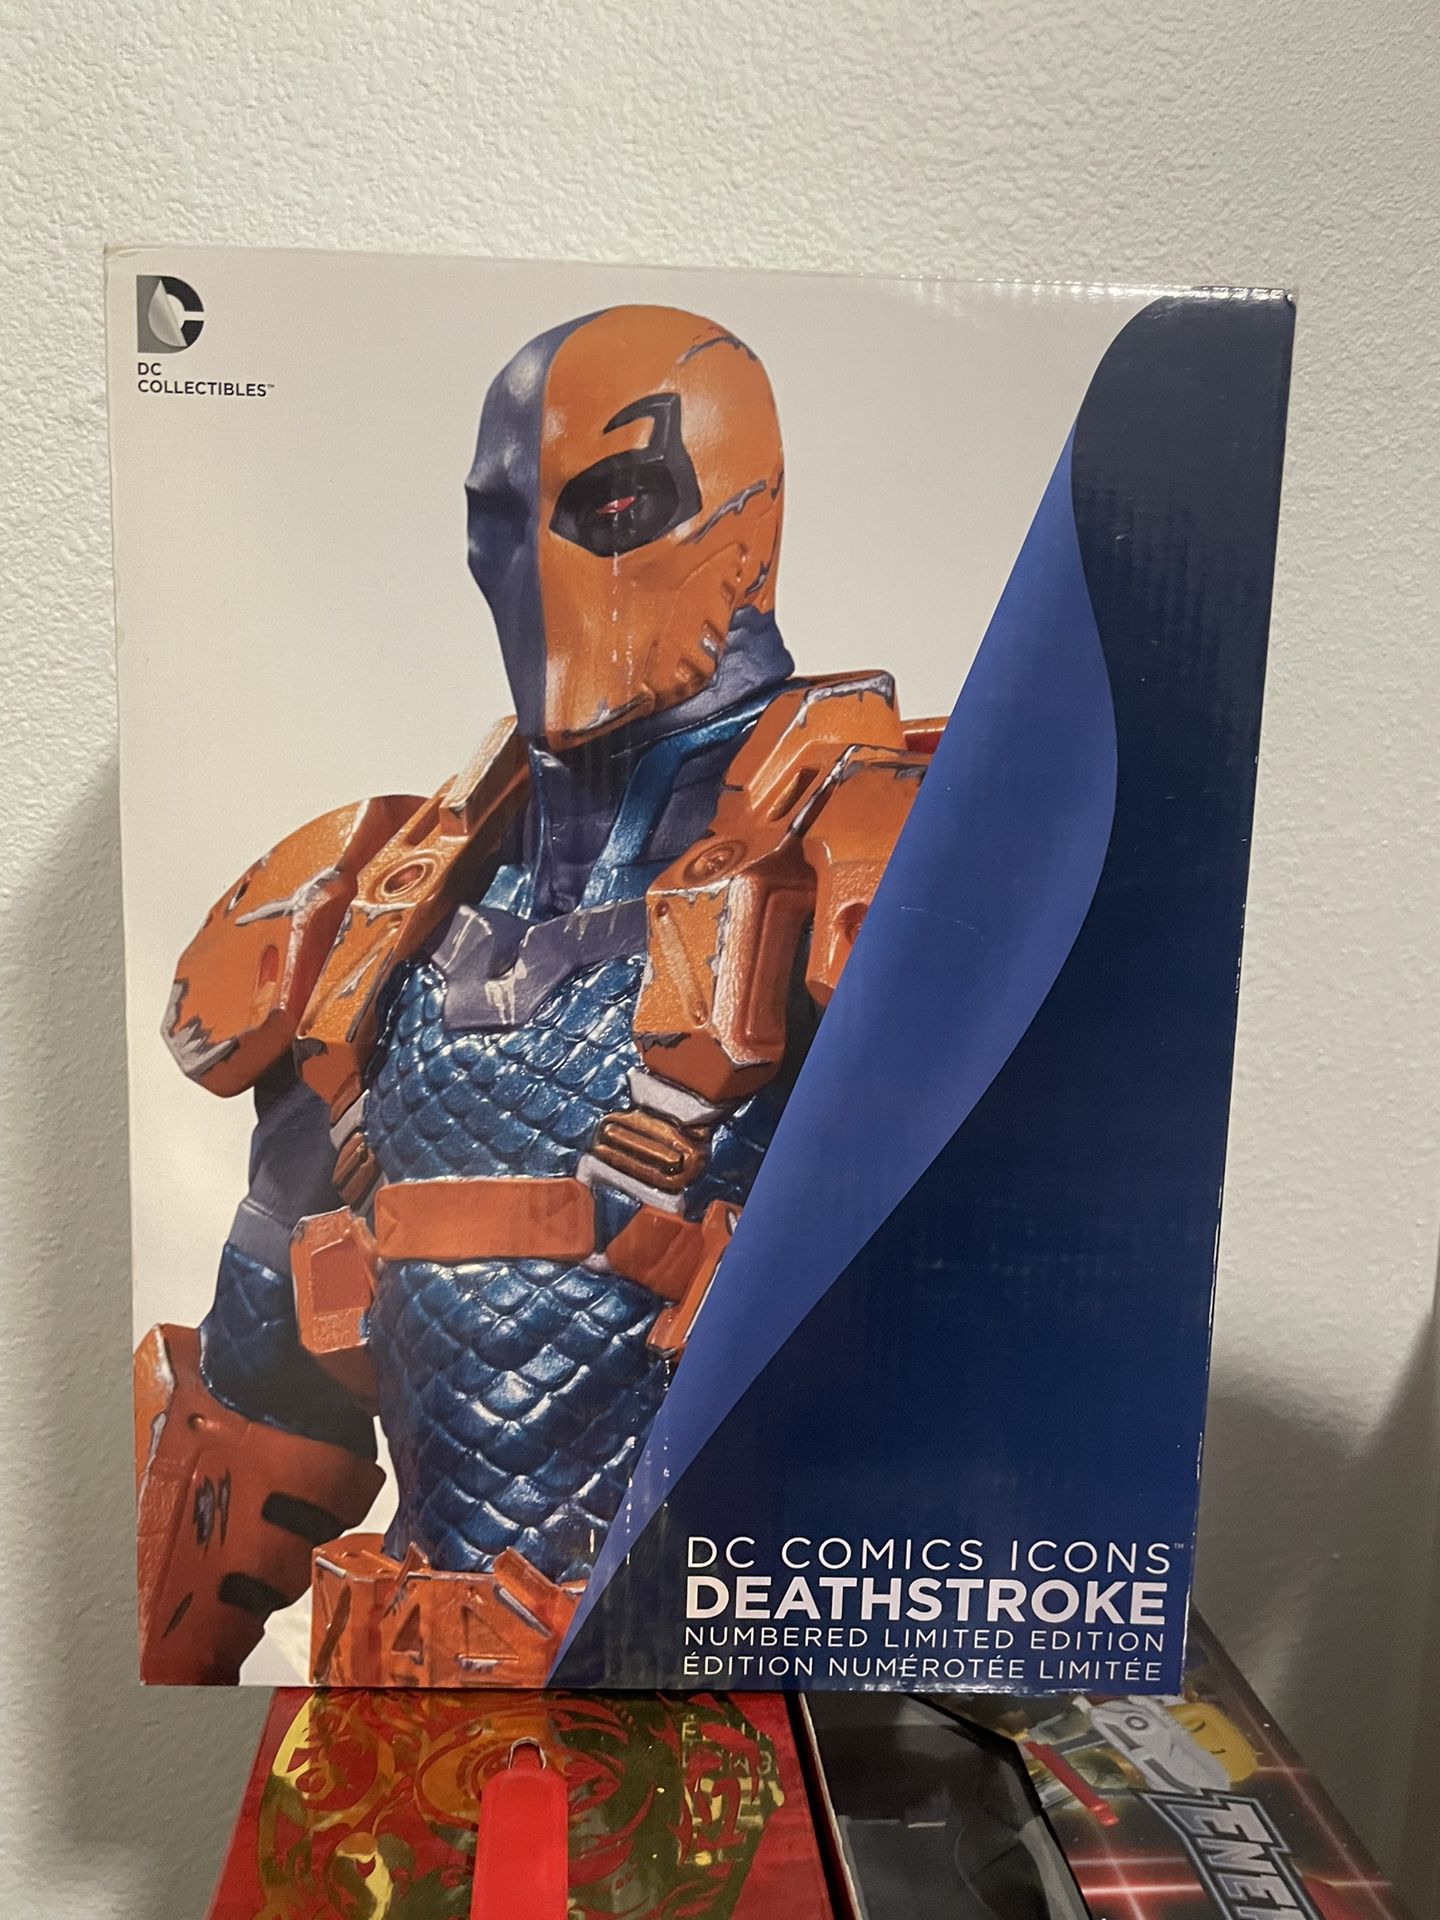 DC COMICS ICONS DEATHSTROKE NUMBERED LIMITED EDITION